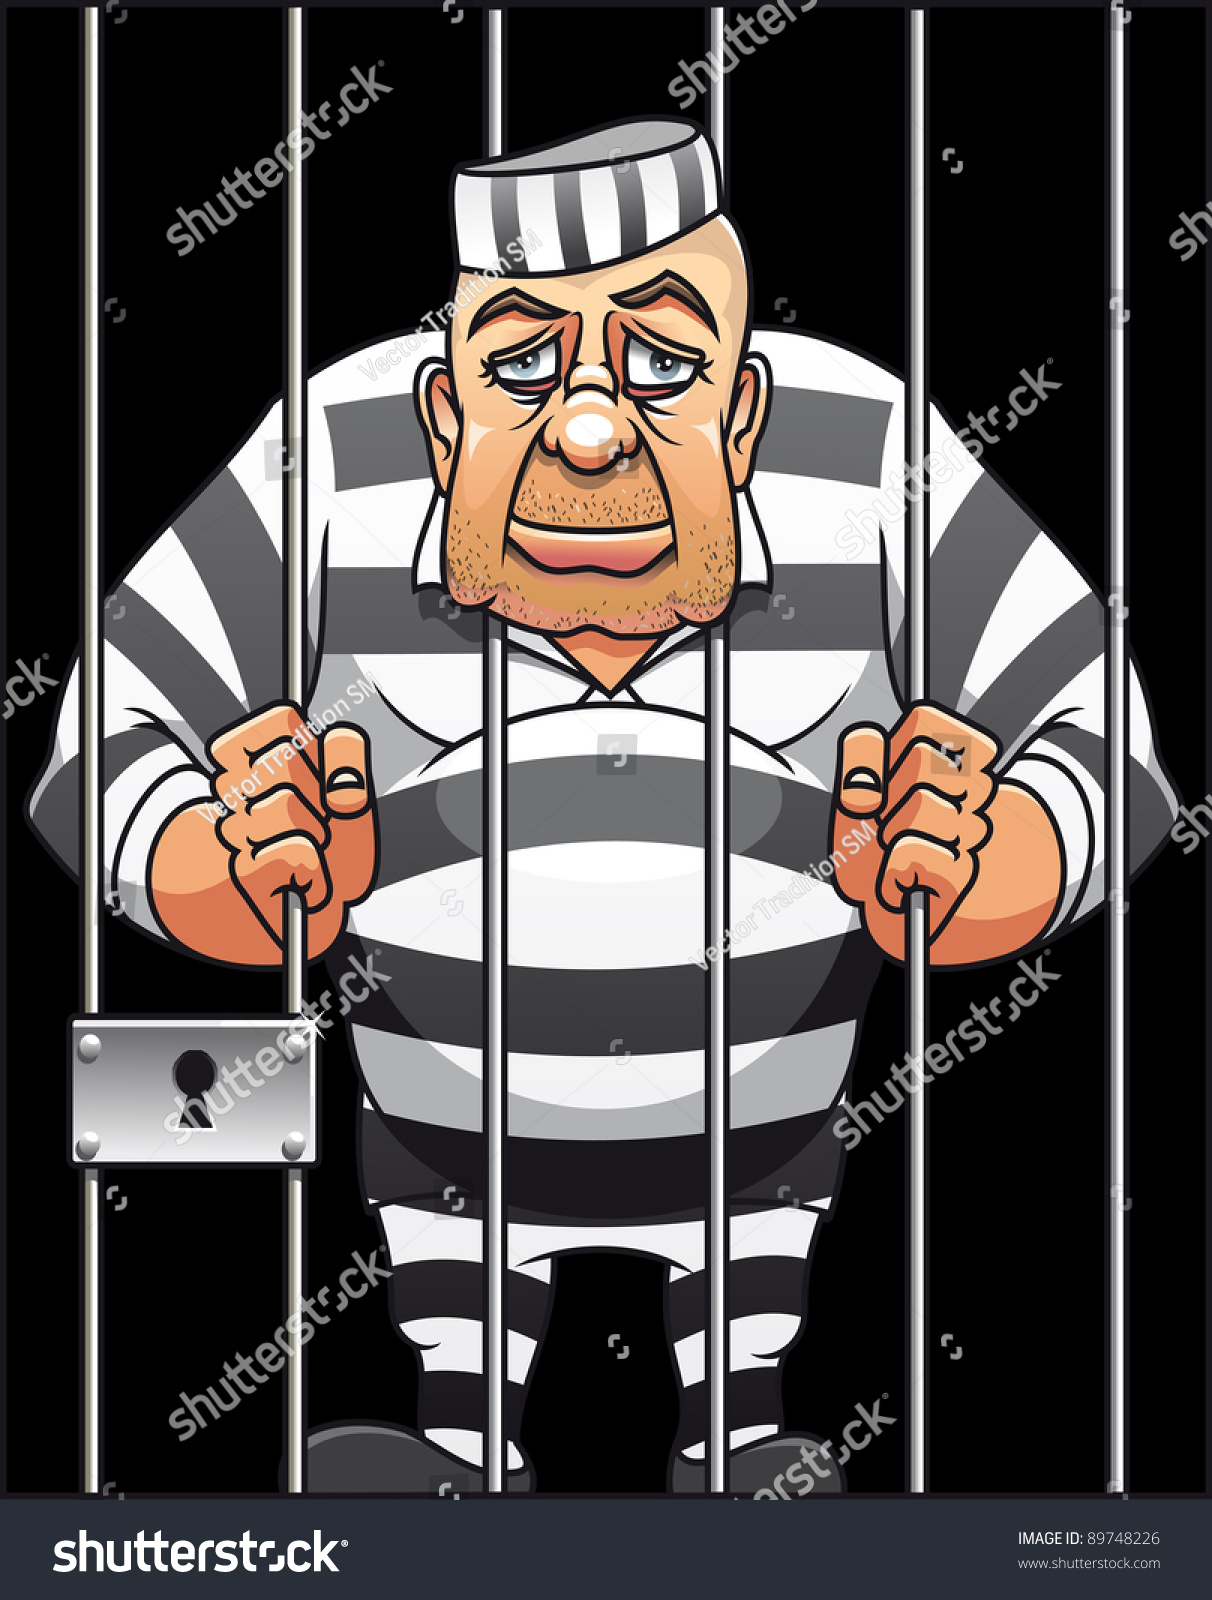 Captured danger prisoner in cartoon style for justice design. Vector version also available in gallery